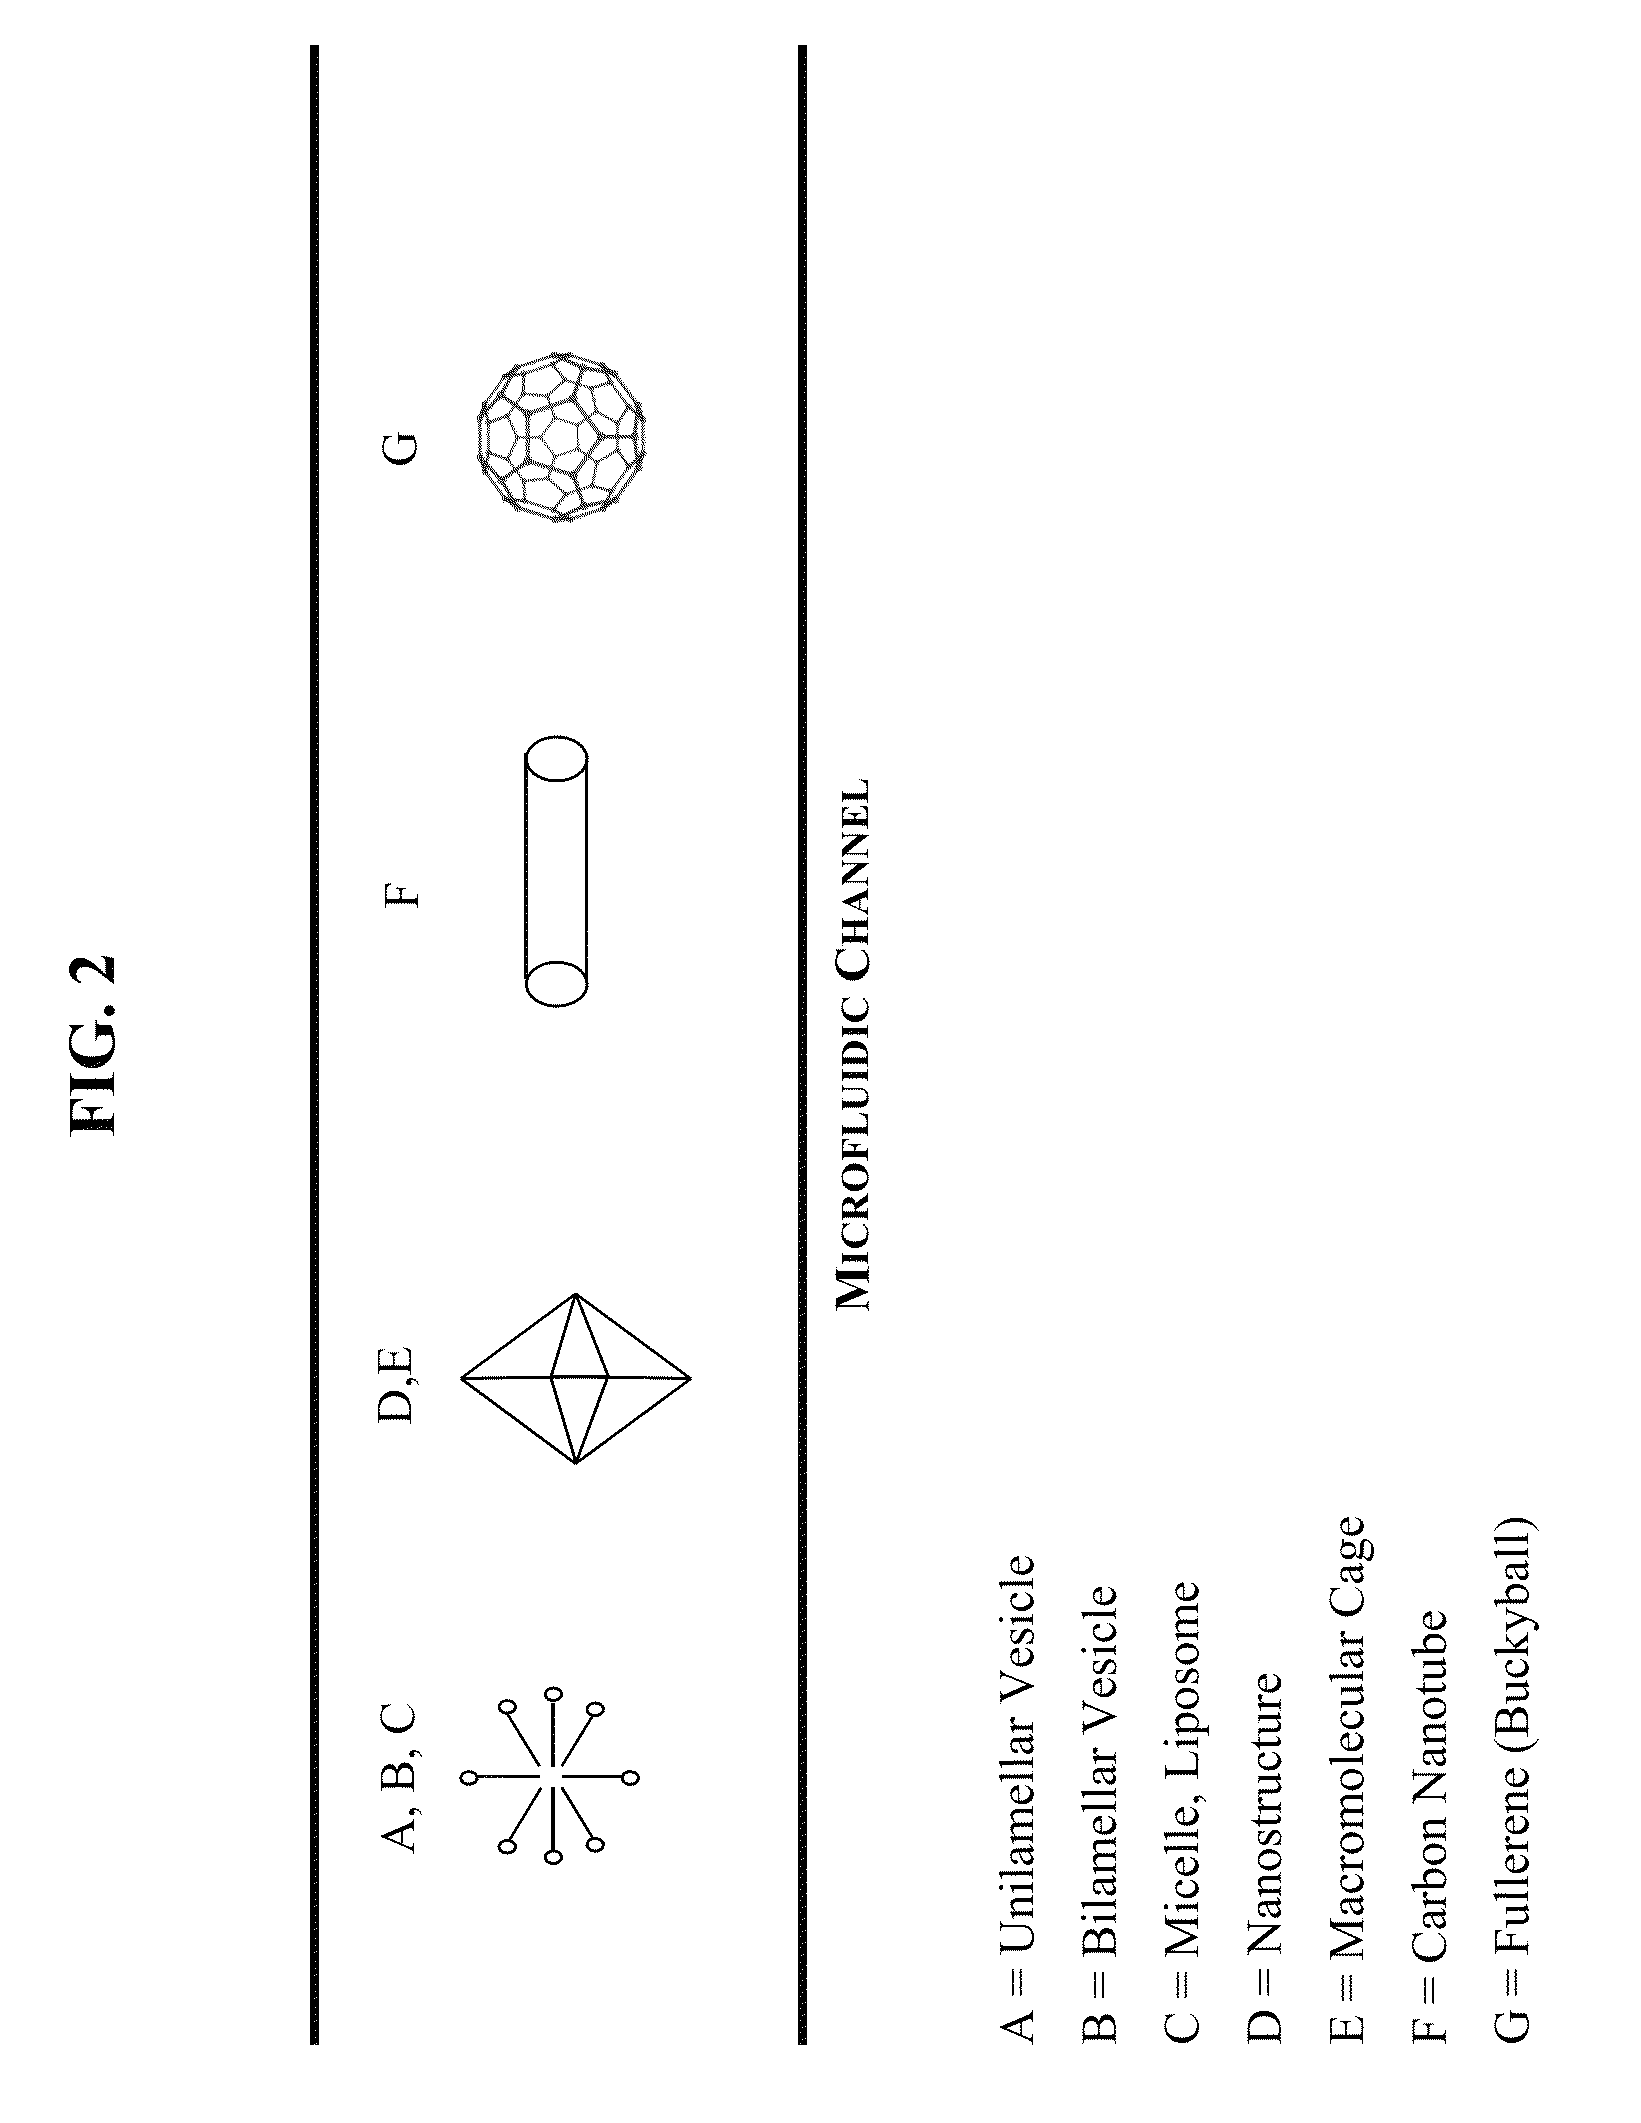 Channels with cross-sectional thermal gradients